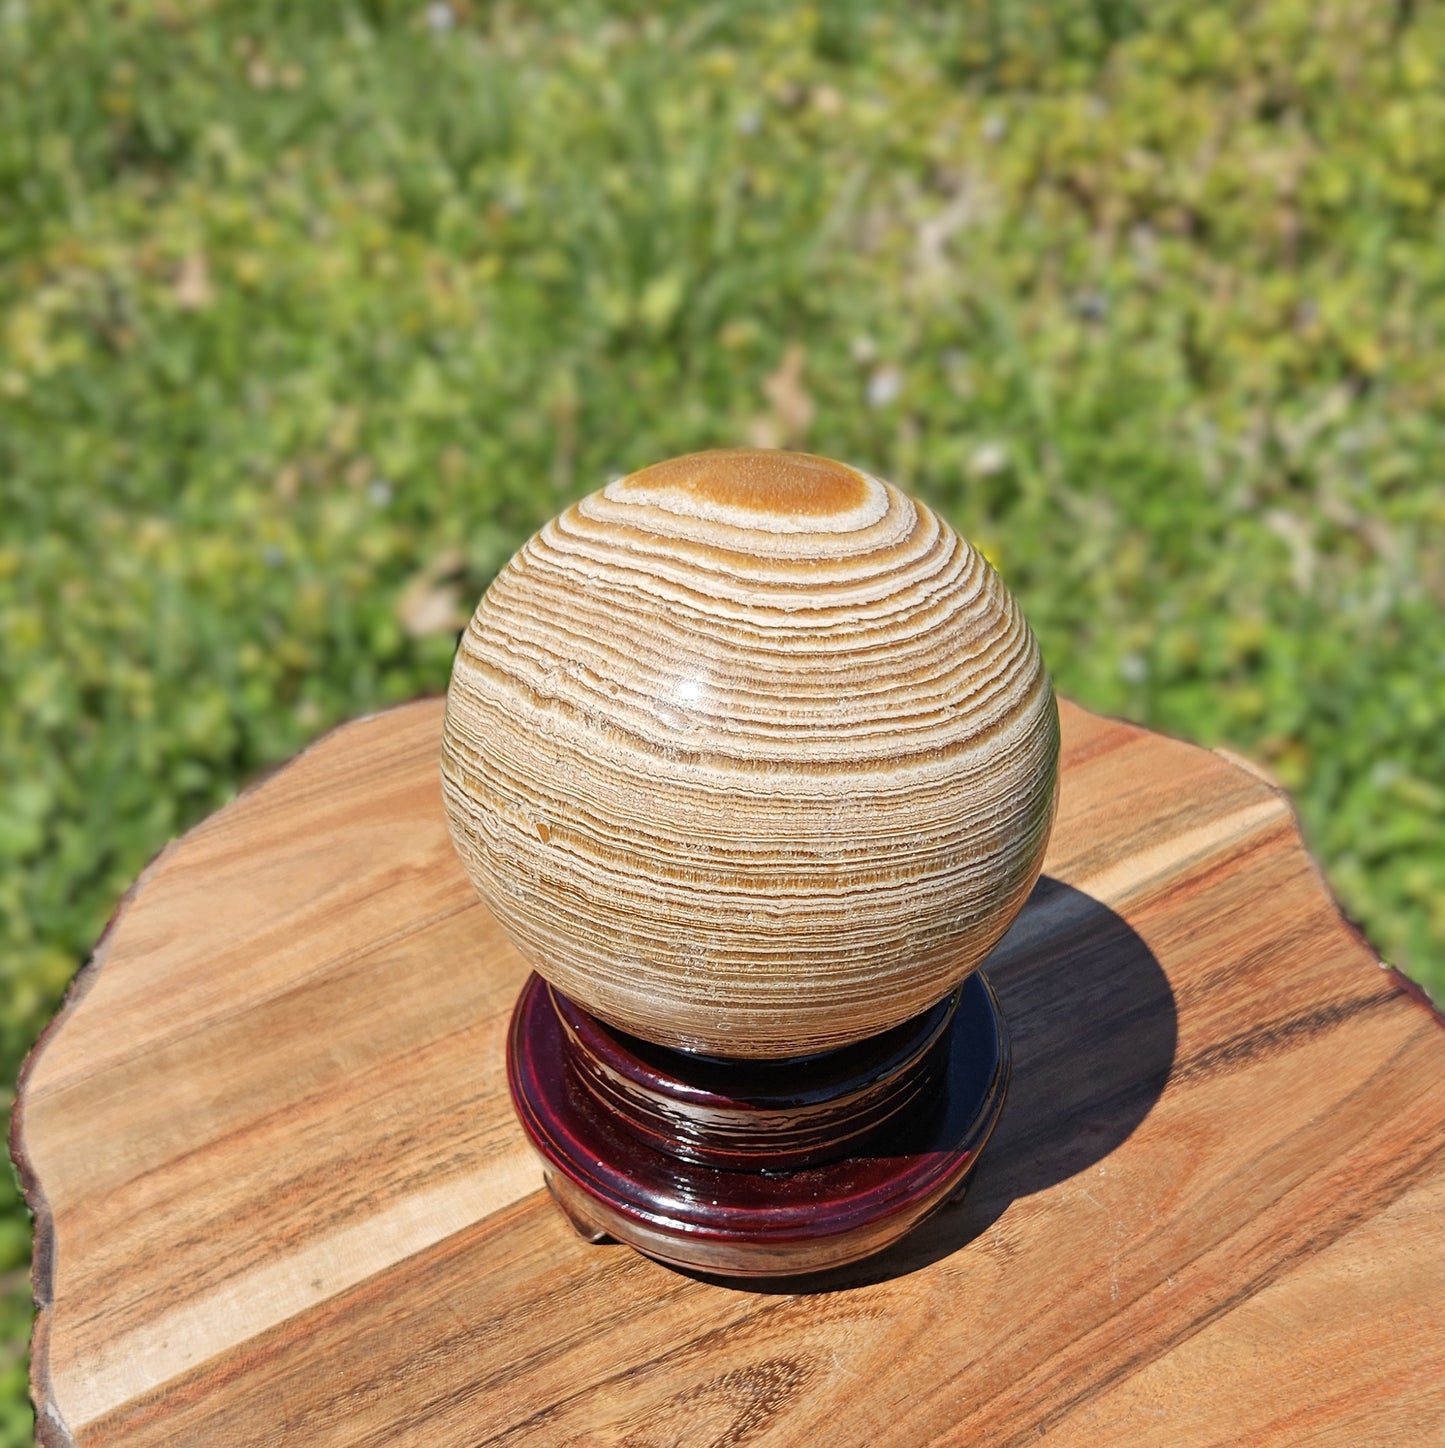 Copy of Banded Aragonite Sphere - Statement Piece over 100mm Free stand included